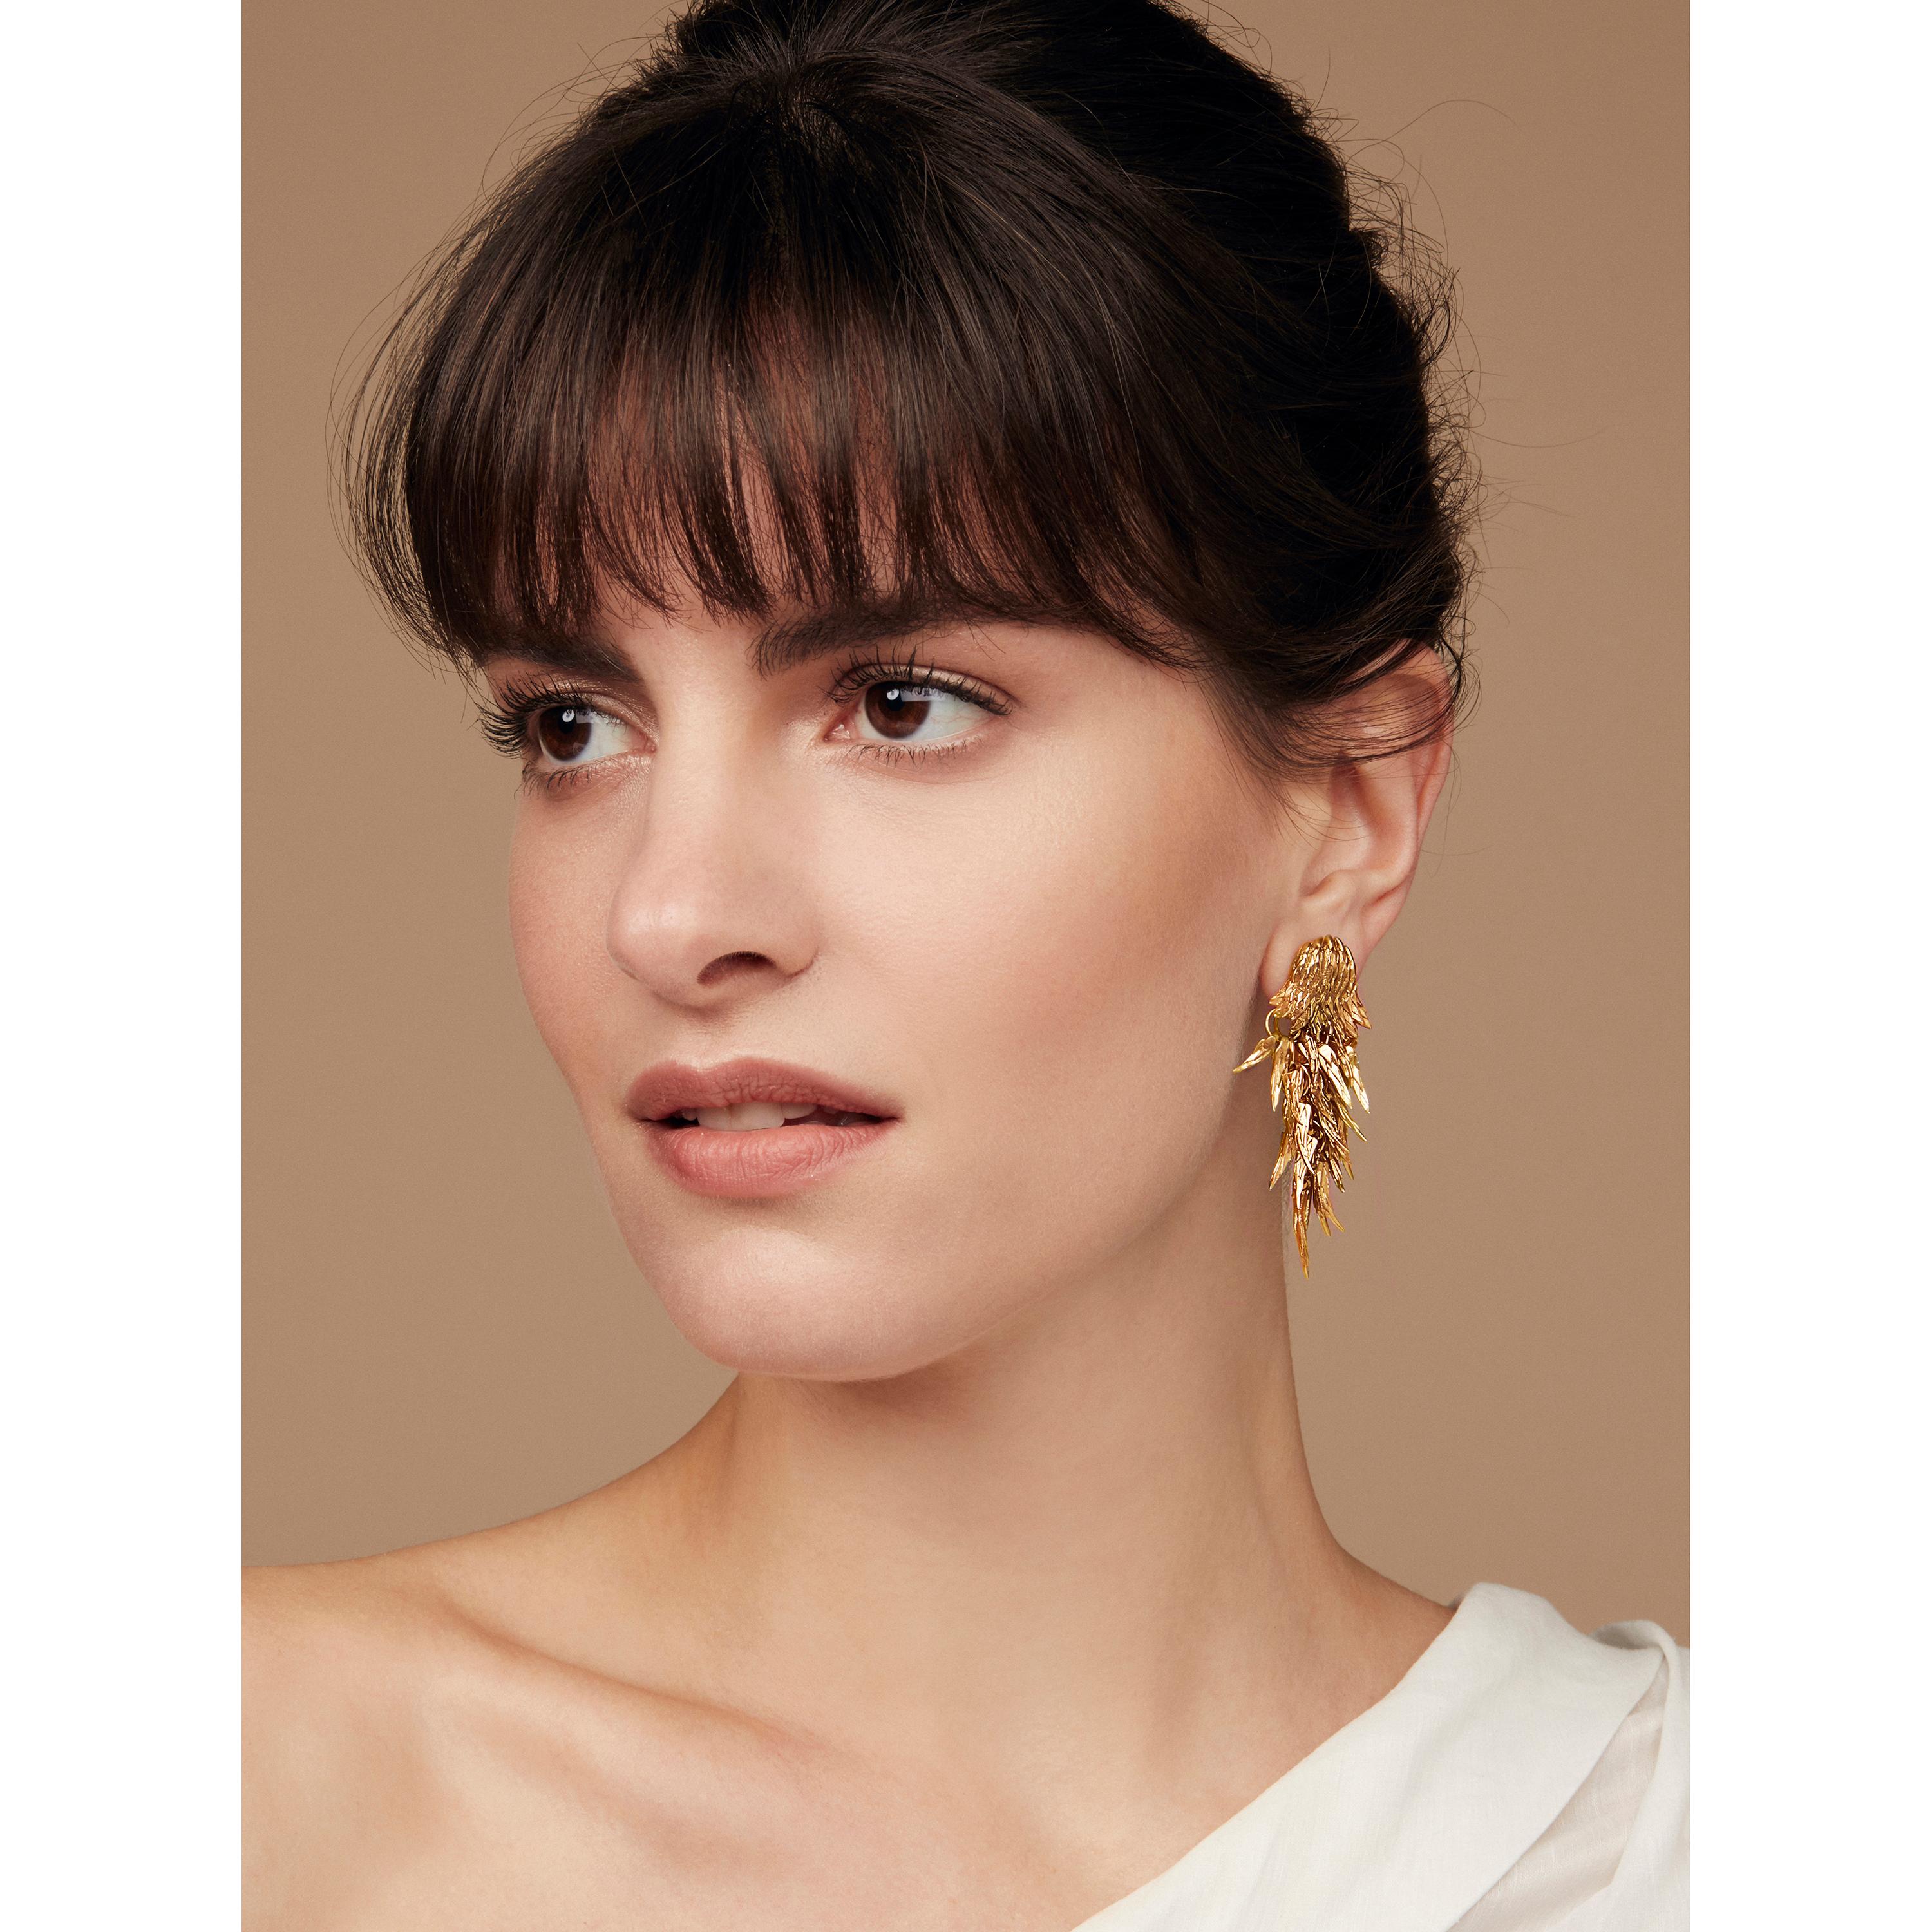 A simple but surprising pair of earrings, the bear’s paws are detailed with small tufts of fur which move as the wearer turns. To know more about the inspiration behind this piece read the design notes below. Our Dionysus Bear is inspired by the